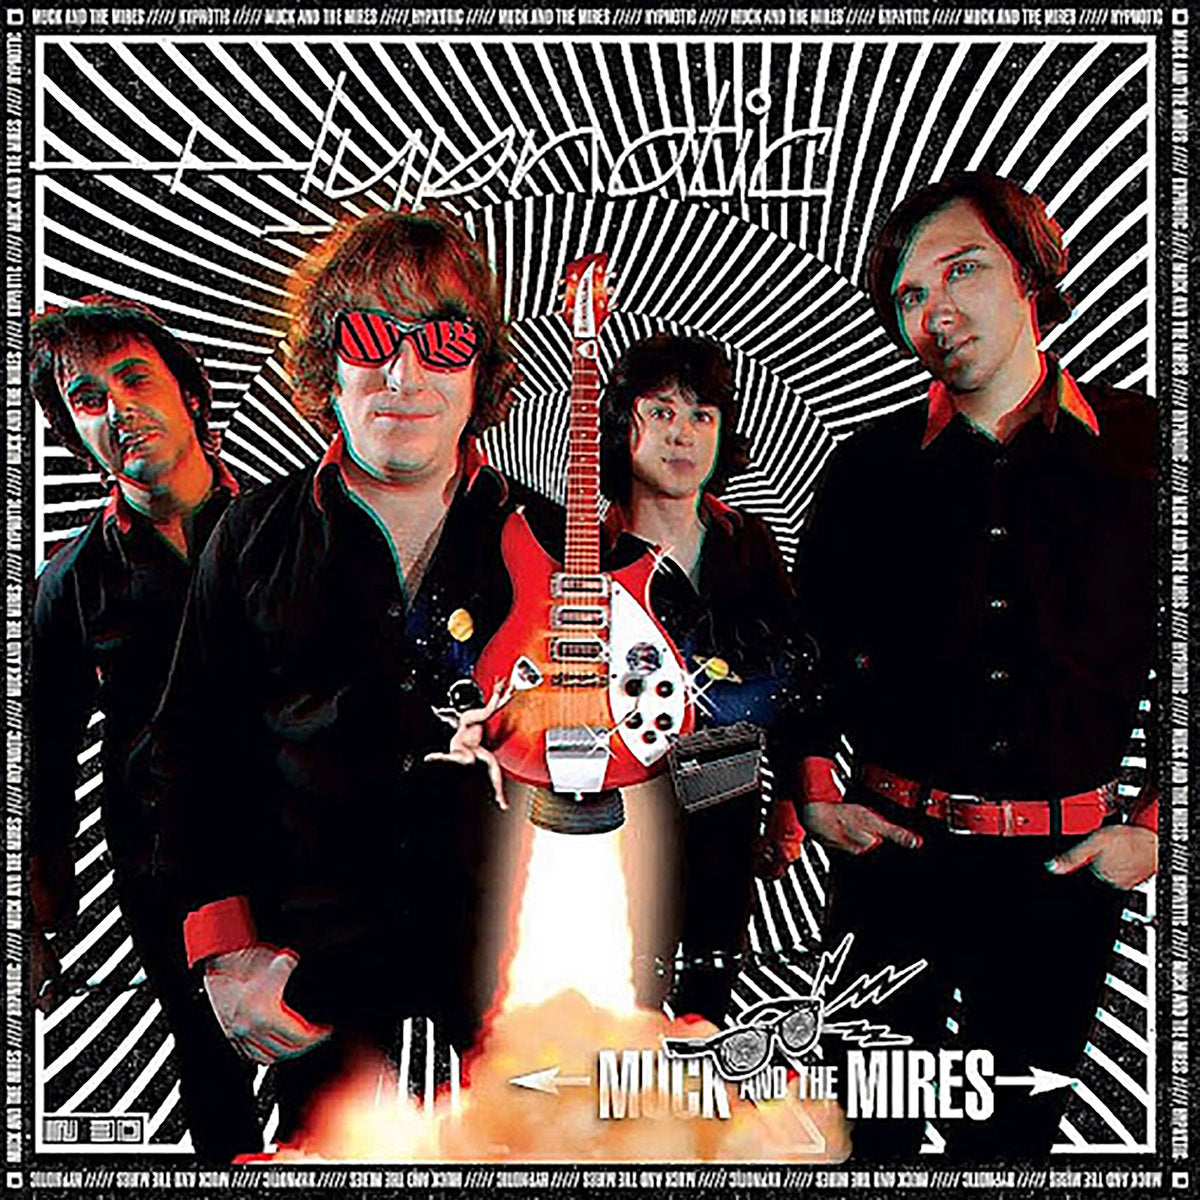 Muck And The Mires- Hypnotic LP ~PRODUCED BY KIM FOWLEY!